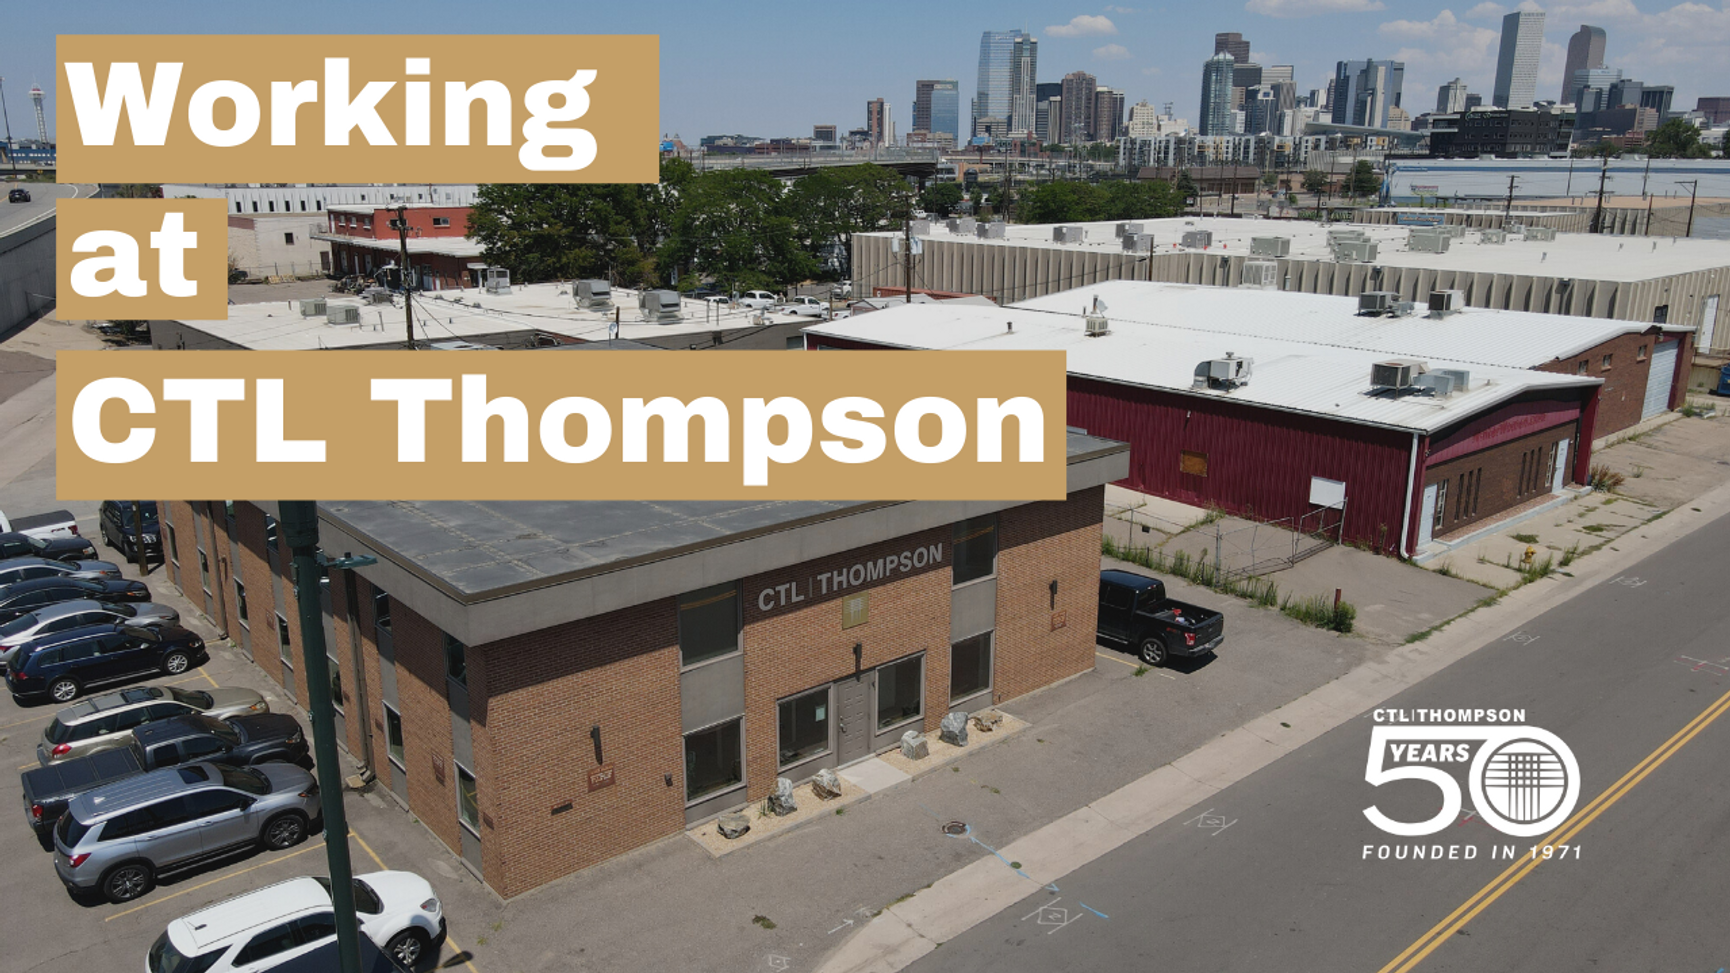 Learn more about CTL Thompson